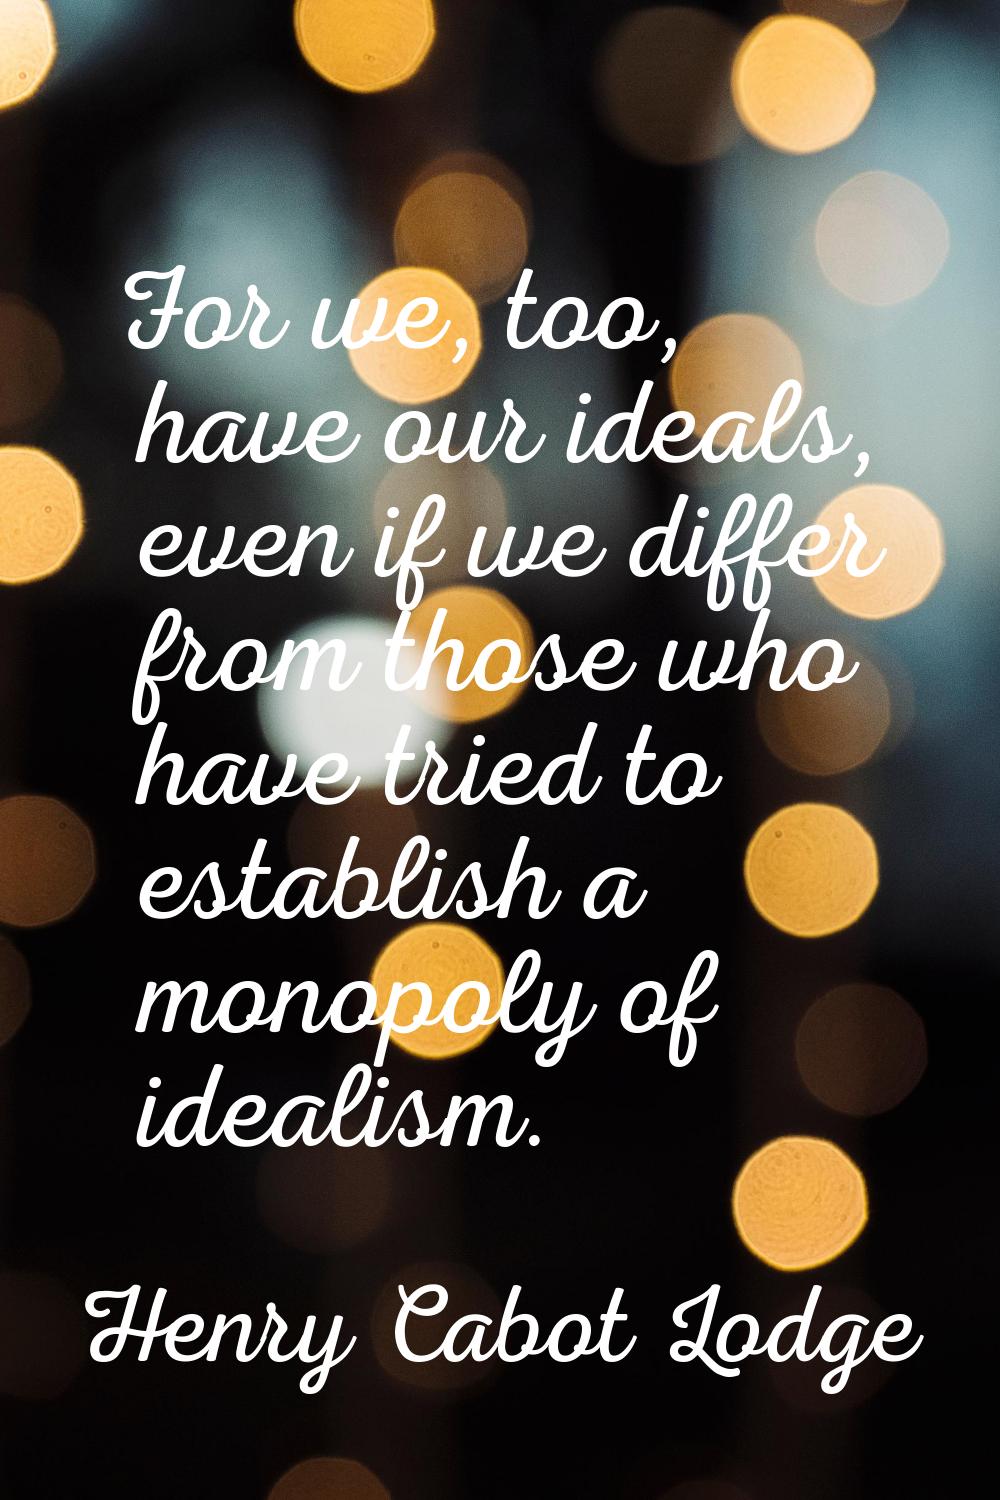 For we, too, have our ideals, even if we differ from those who have tried to establish a monopoly o